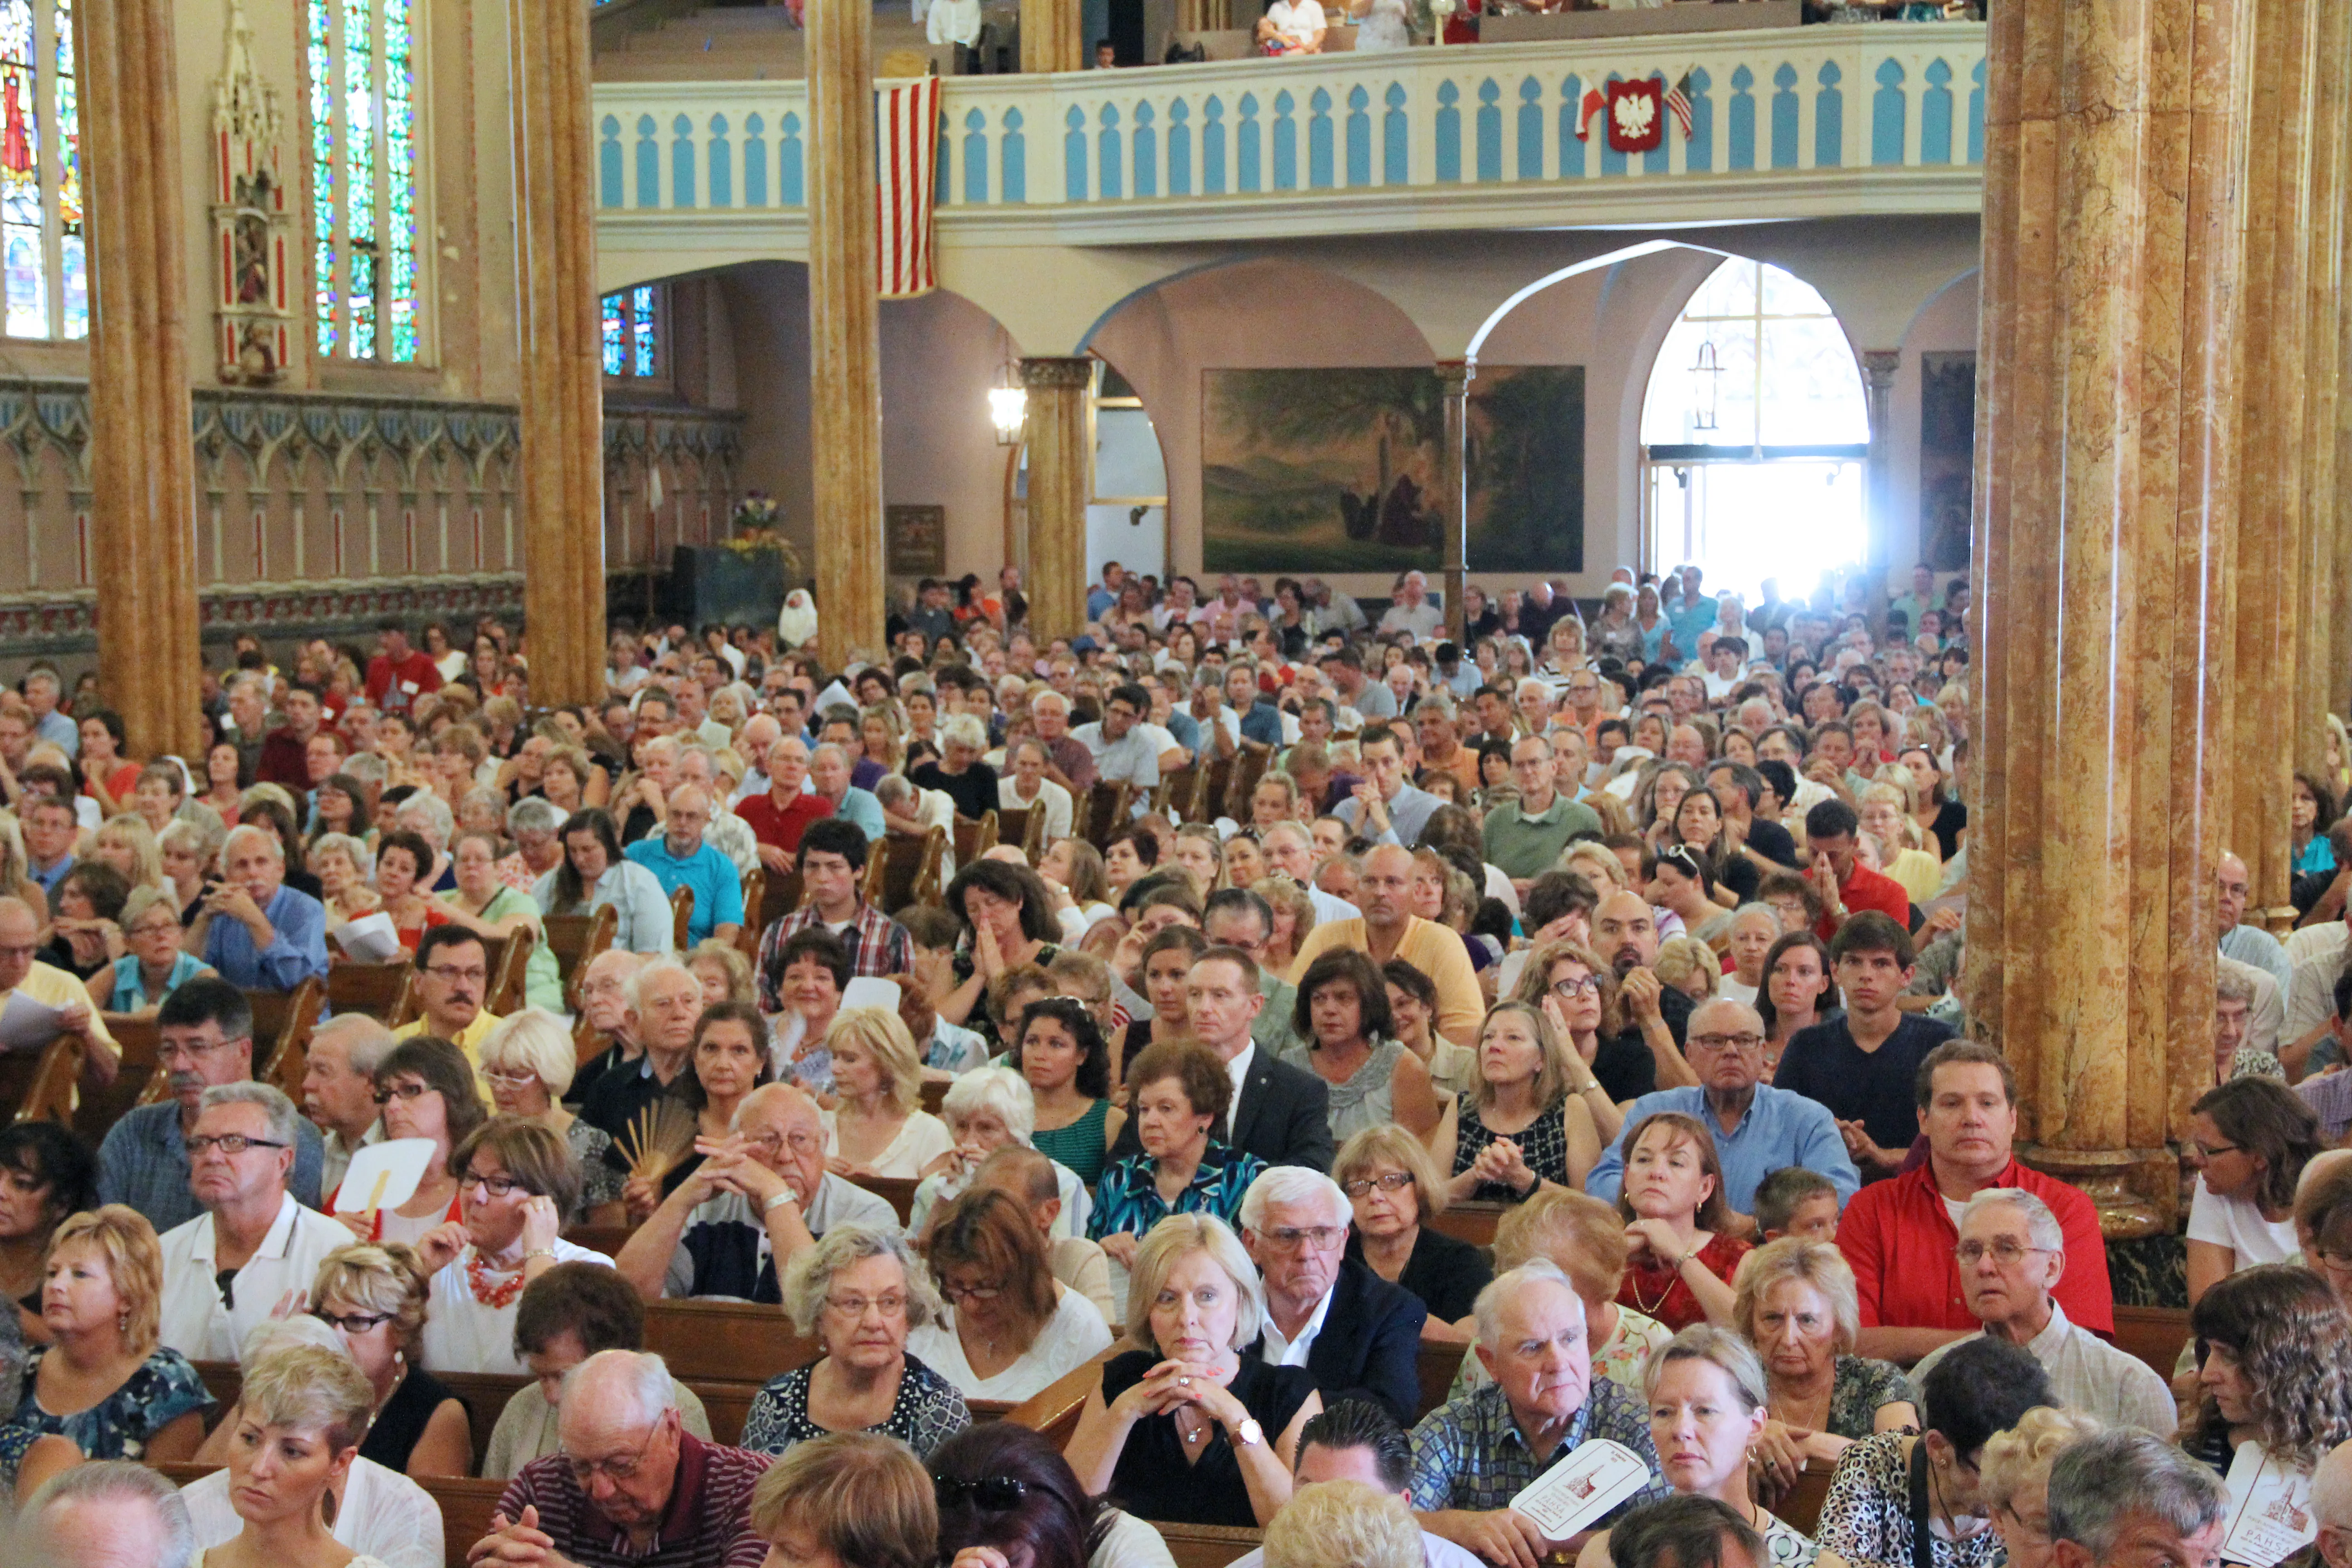 Massgoers fill St. Albertus Church in Detroit, Michigan, for Mass Mob V Aug. 10, 2014. The movement, which started in Buffalo in 2013 and quickly spread to other cities, found a lasting home in Detroit, which celebrated 51 events at historic city churches from 2014-19.?w=200&h=150